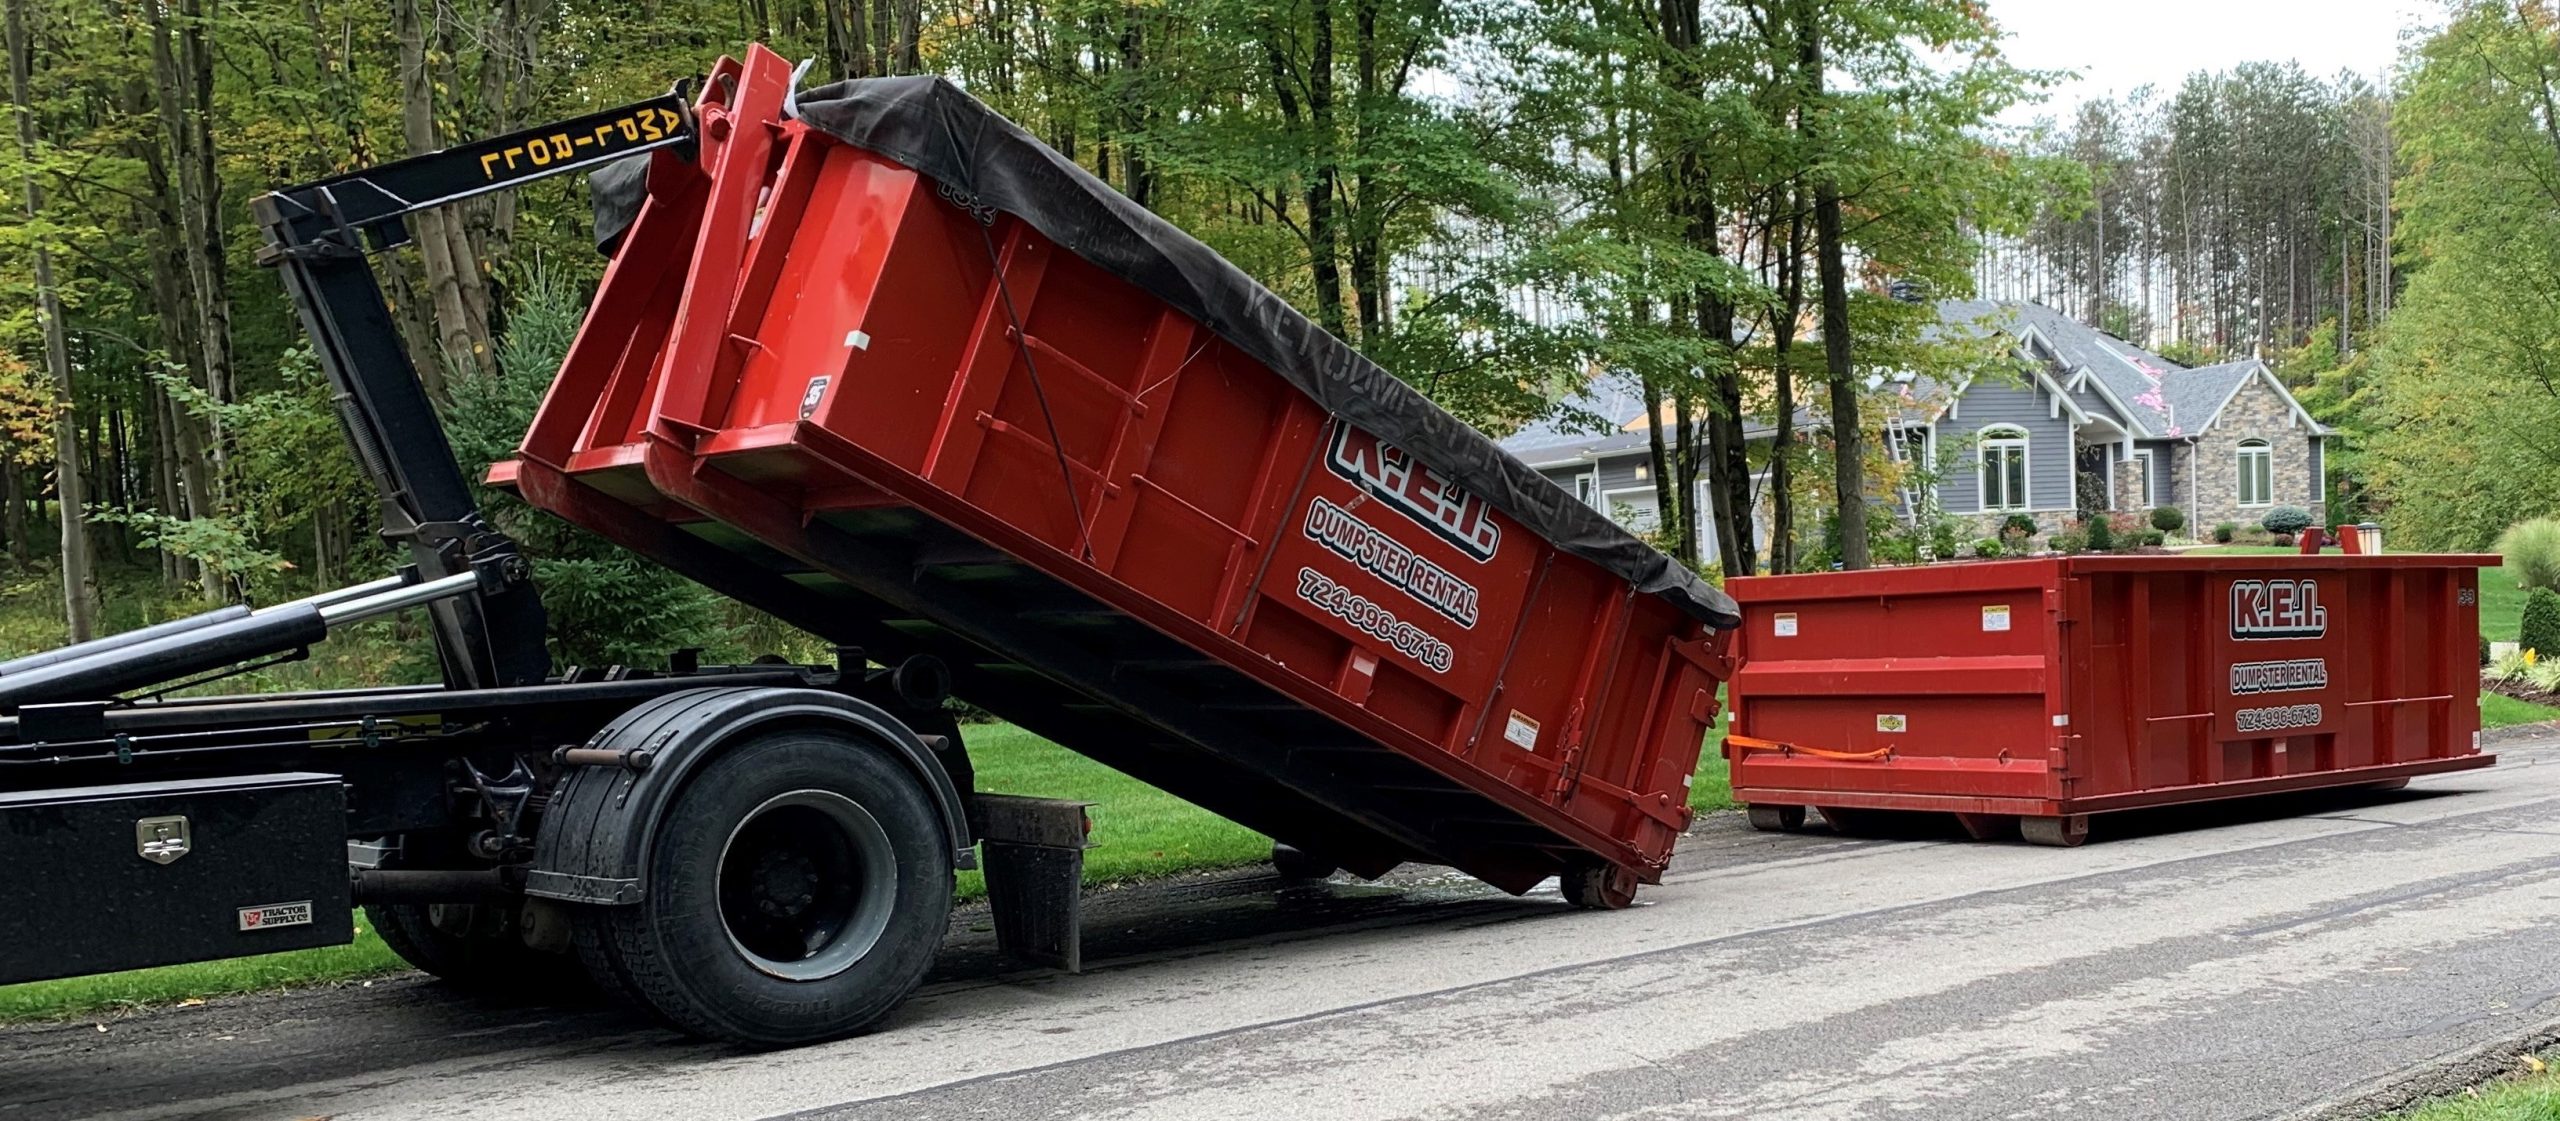 Flexible Dumpster Rentals: Tailoring Solutions to Your Needs